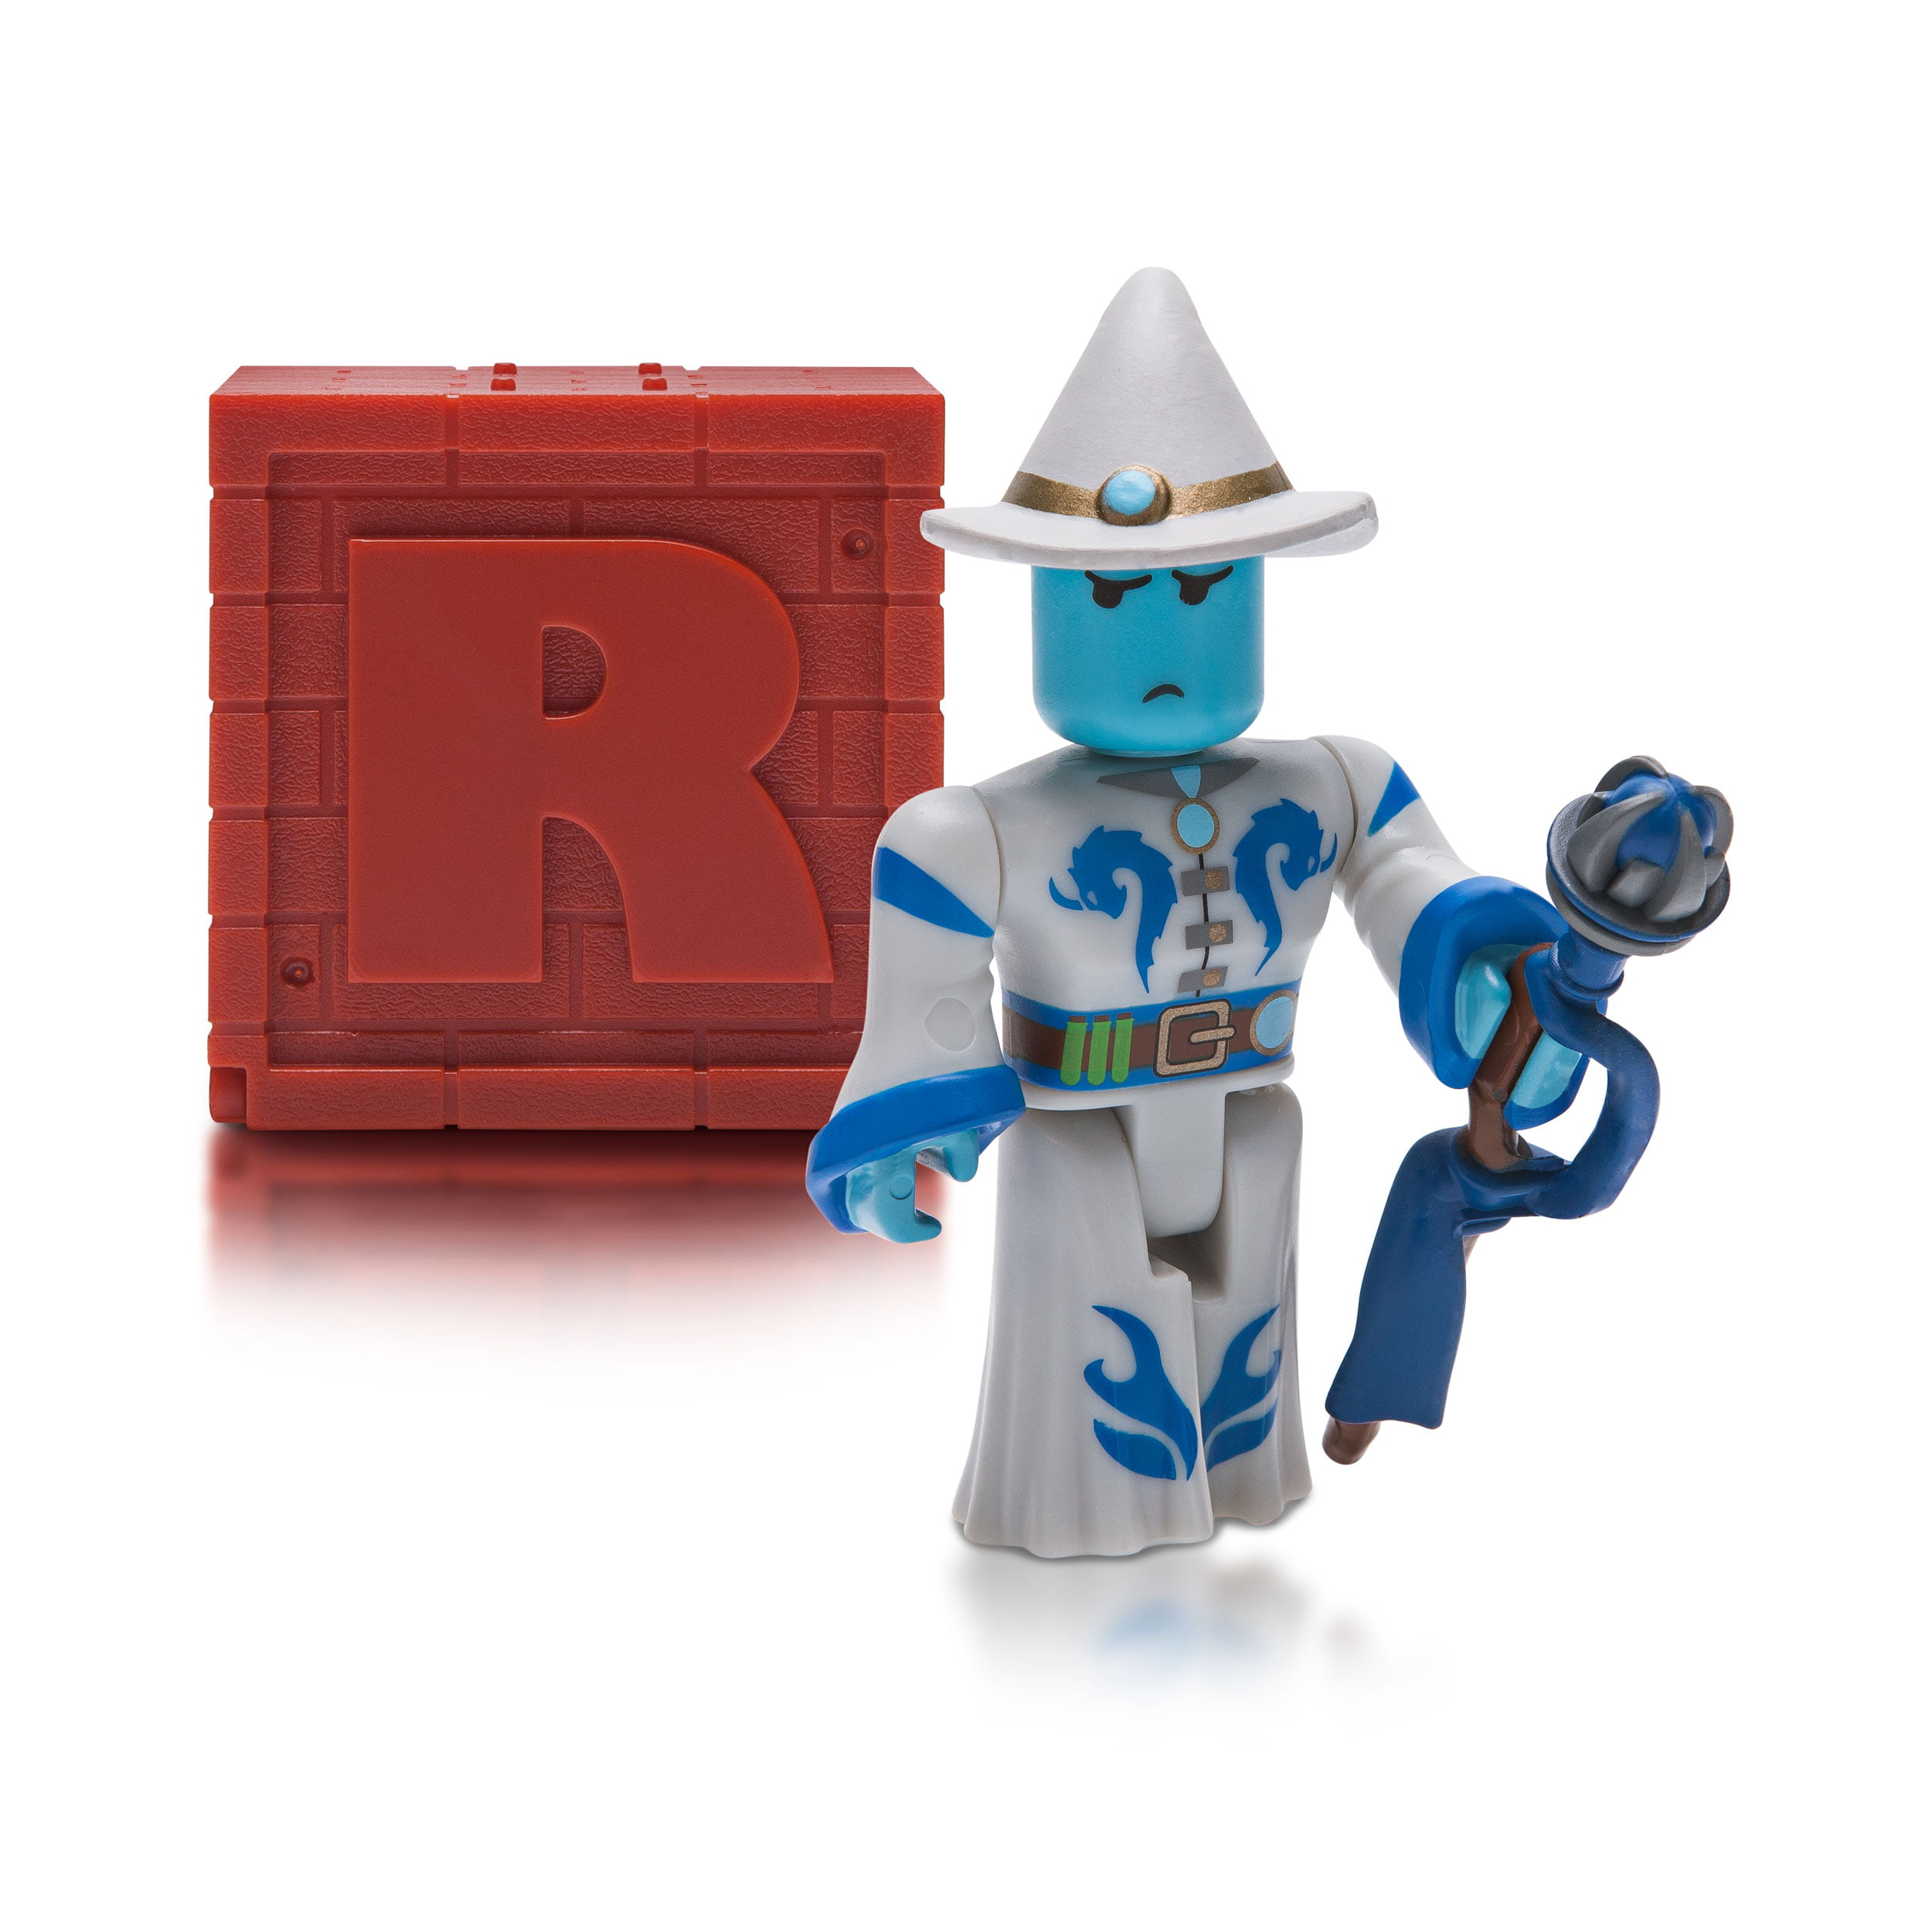 Roblox Action Collection Series 4 Mystery Figure 2 Pack Includes 2 Figures 2 Exclusive Virtual Items Walmart Com Walmart Com - mystery character roblox toys